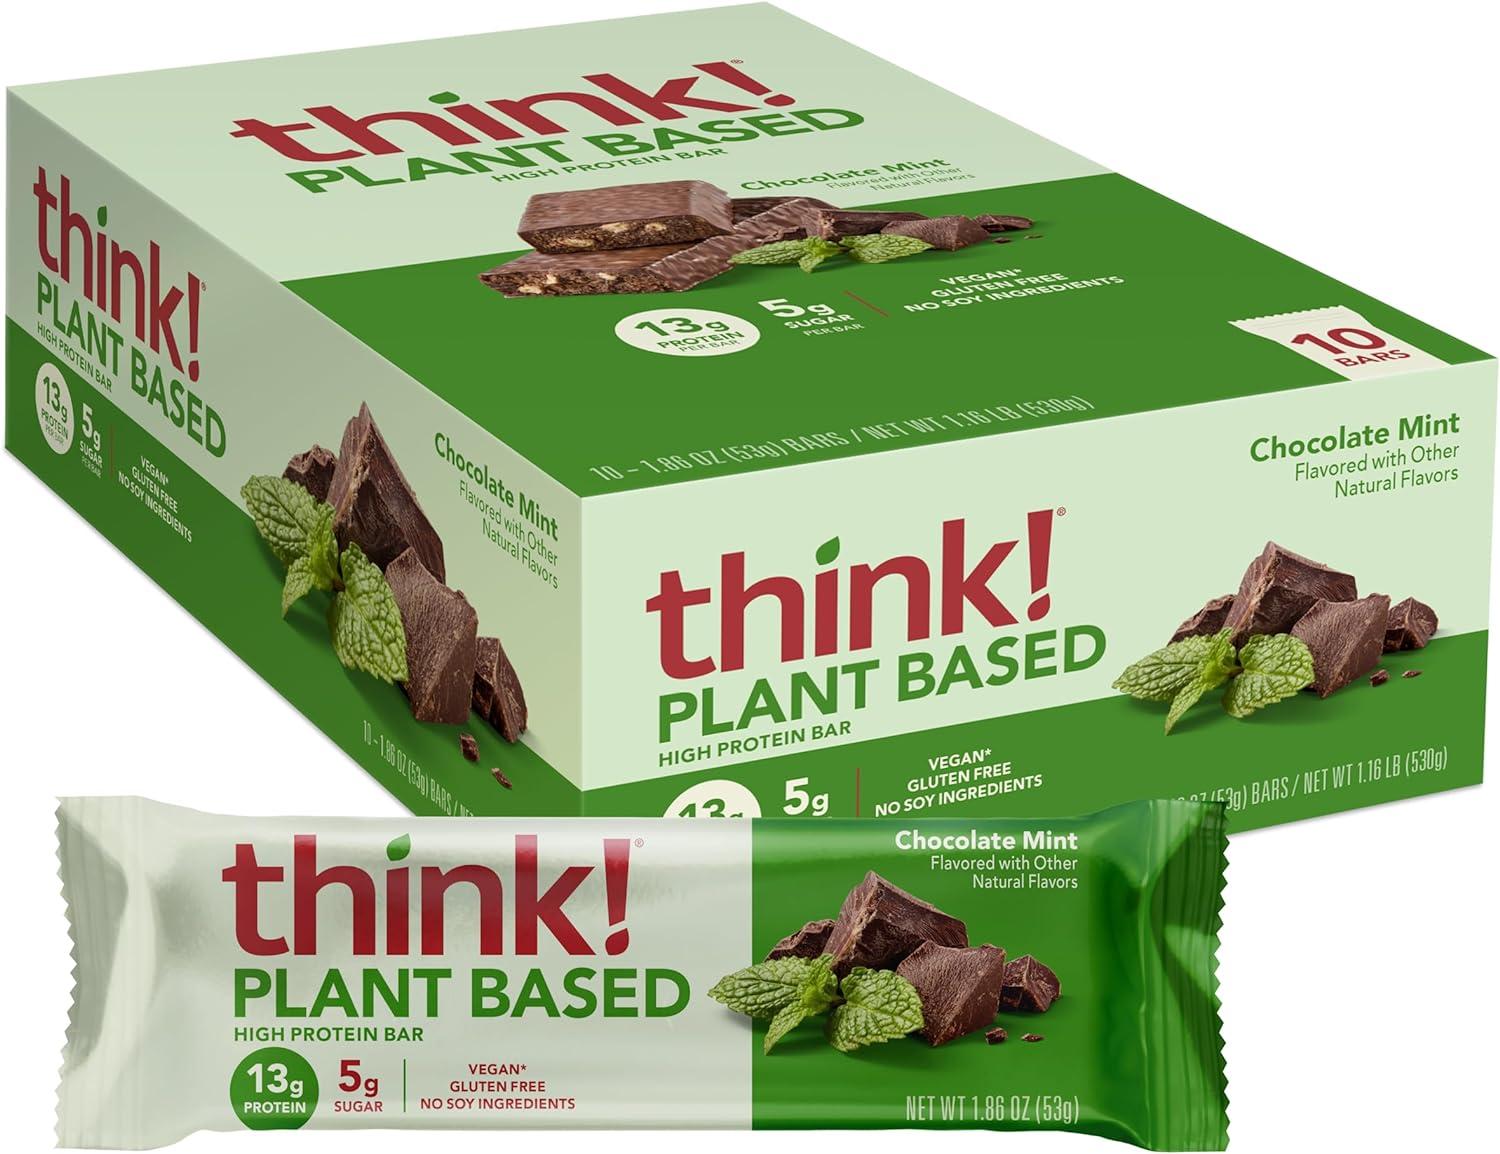 Think Vegan Plant Based High Protein Bars 10 Pack for $8.97